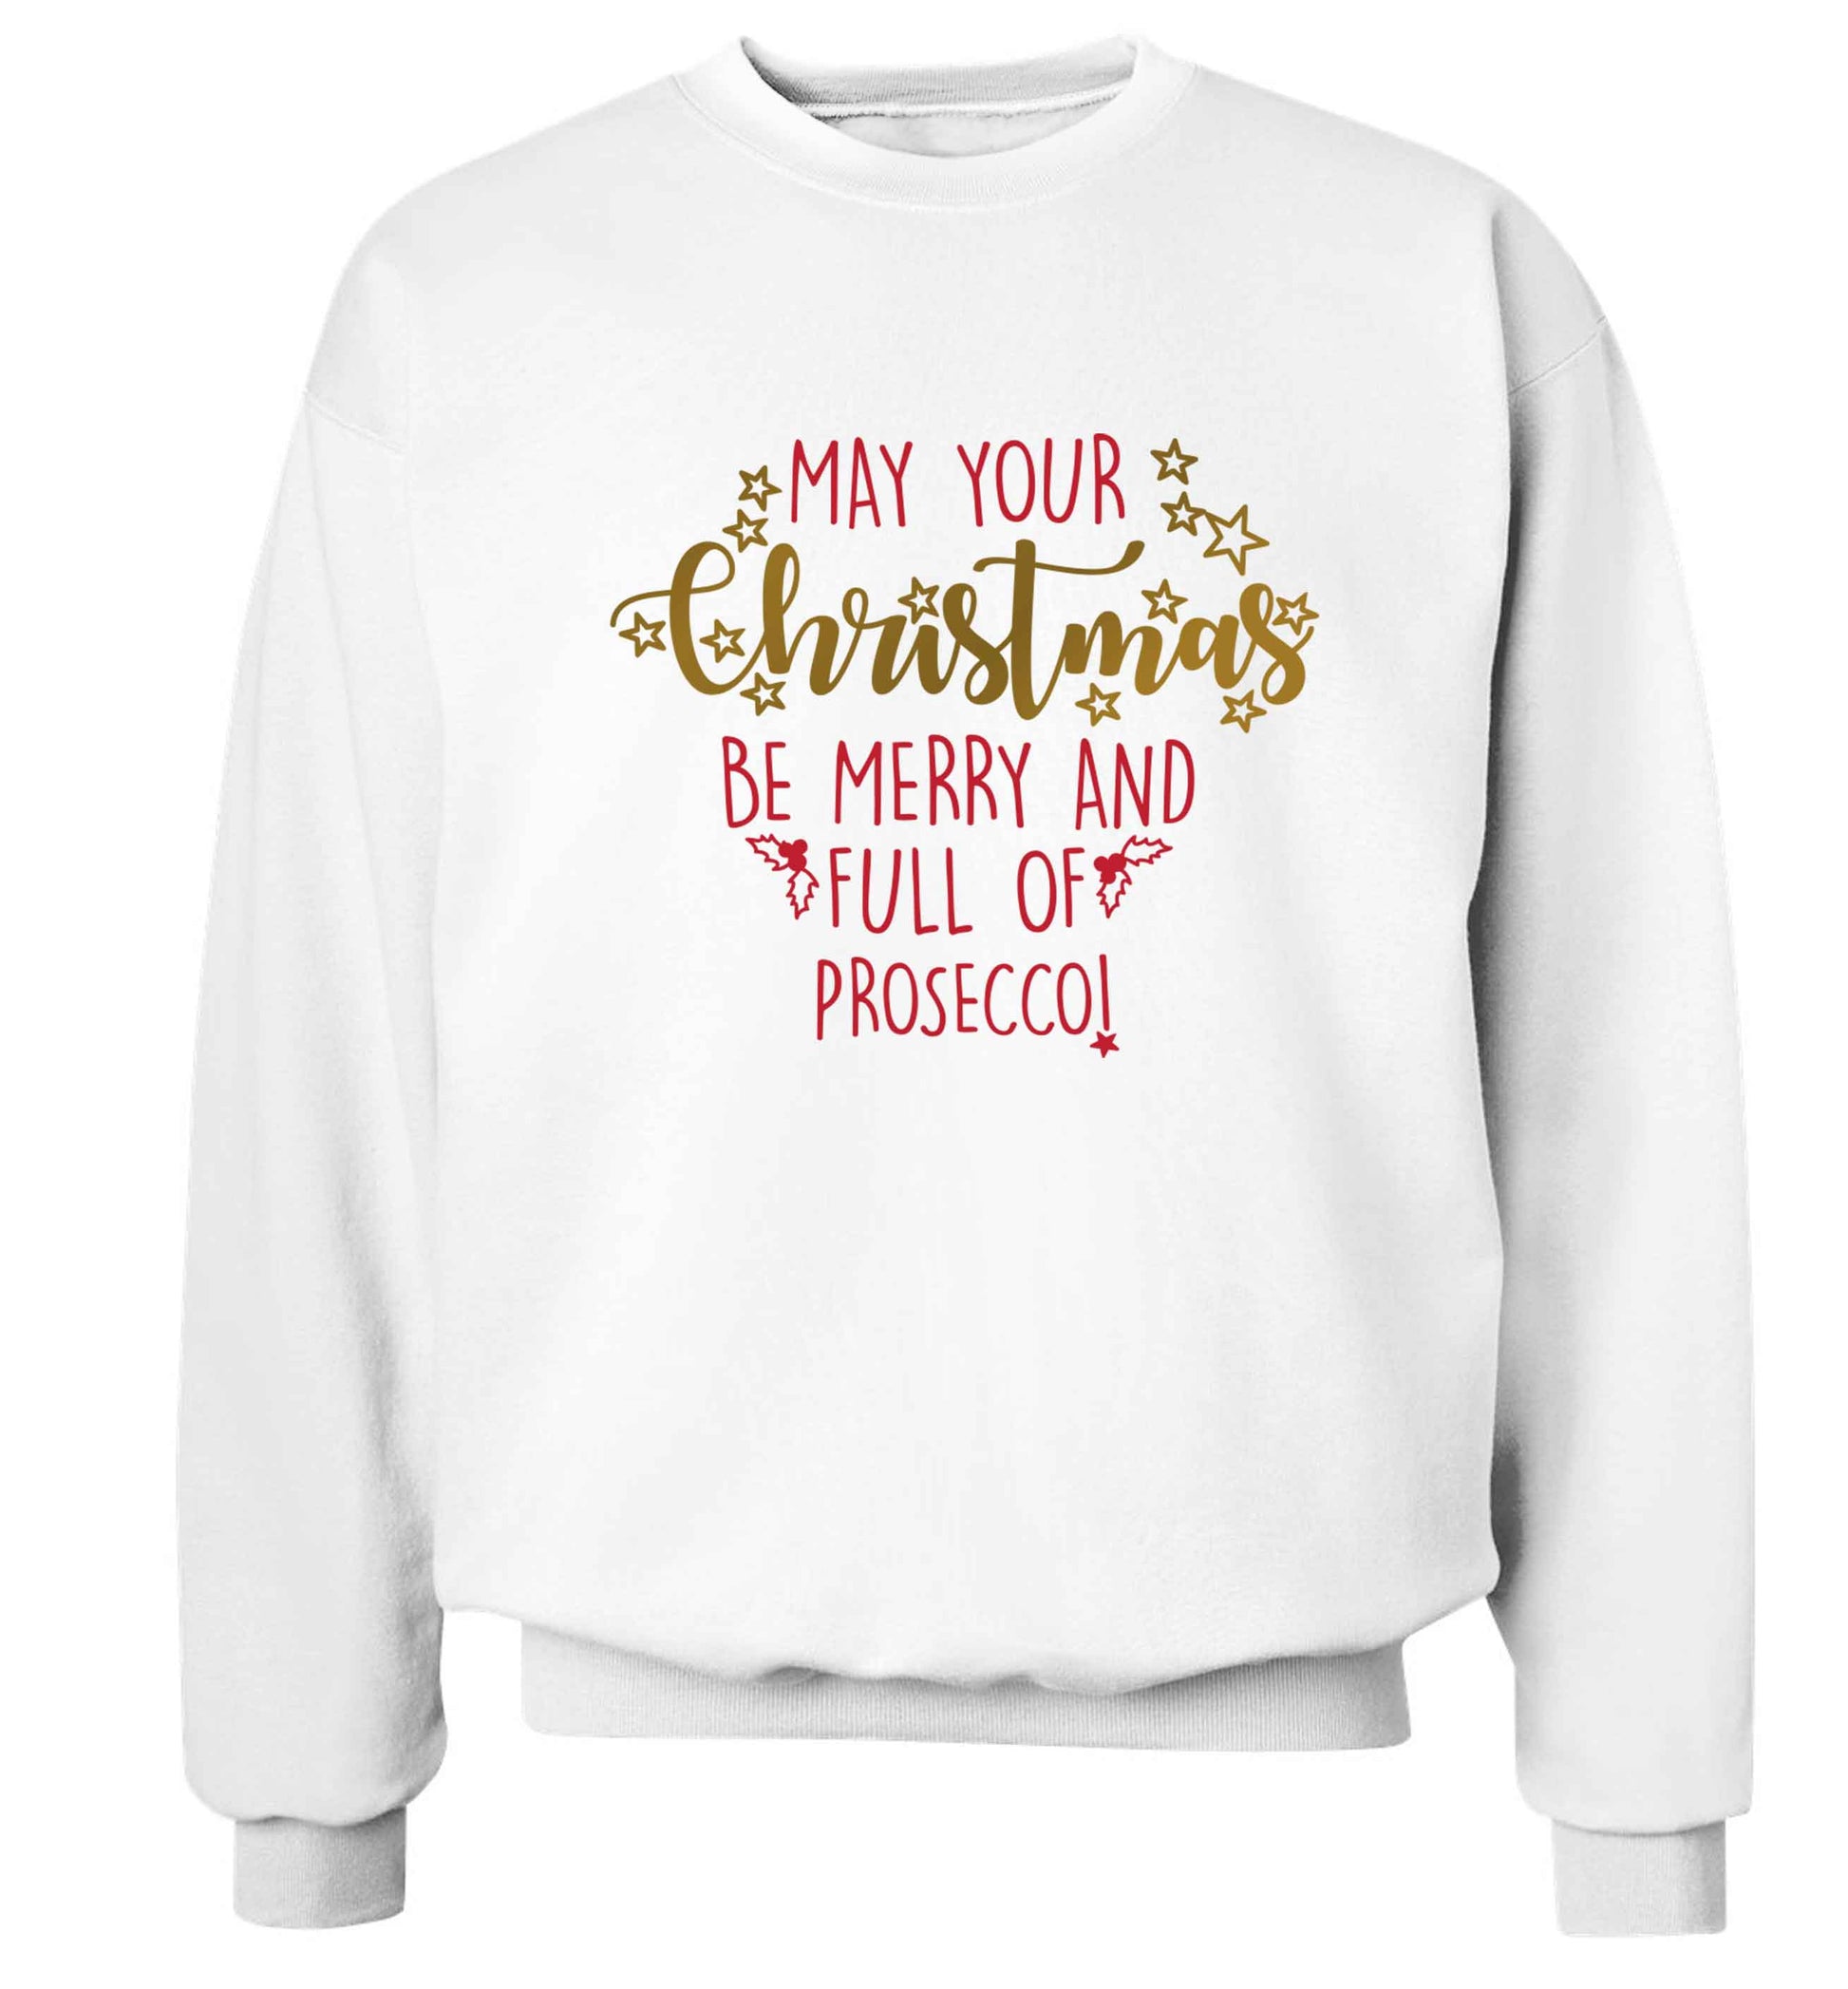 May your Christmas be merry and full of prosecco Adult's unisex white Sweater 2XL